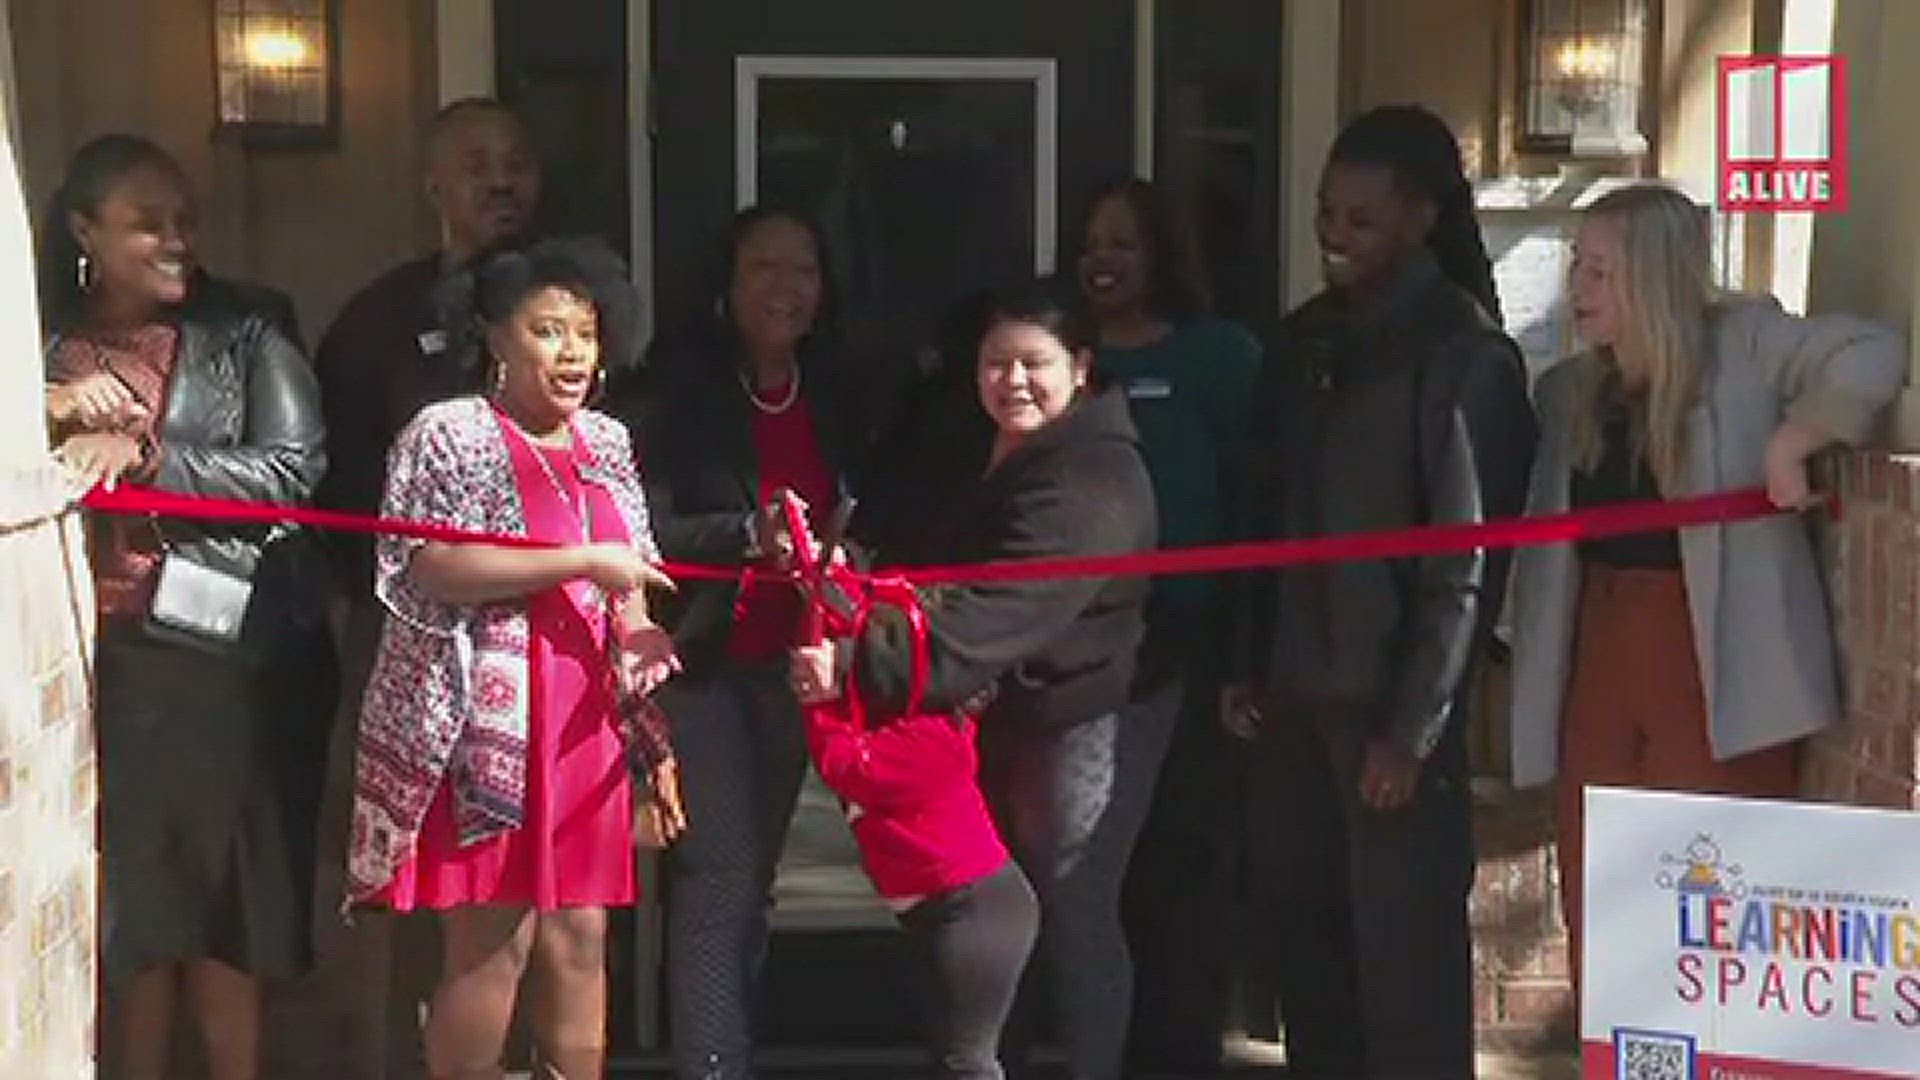 New learning center in Marietta gives parents free preschool opportunity